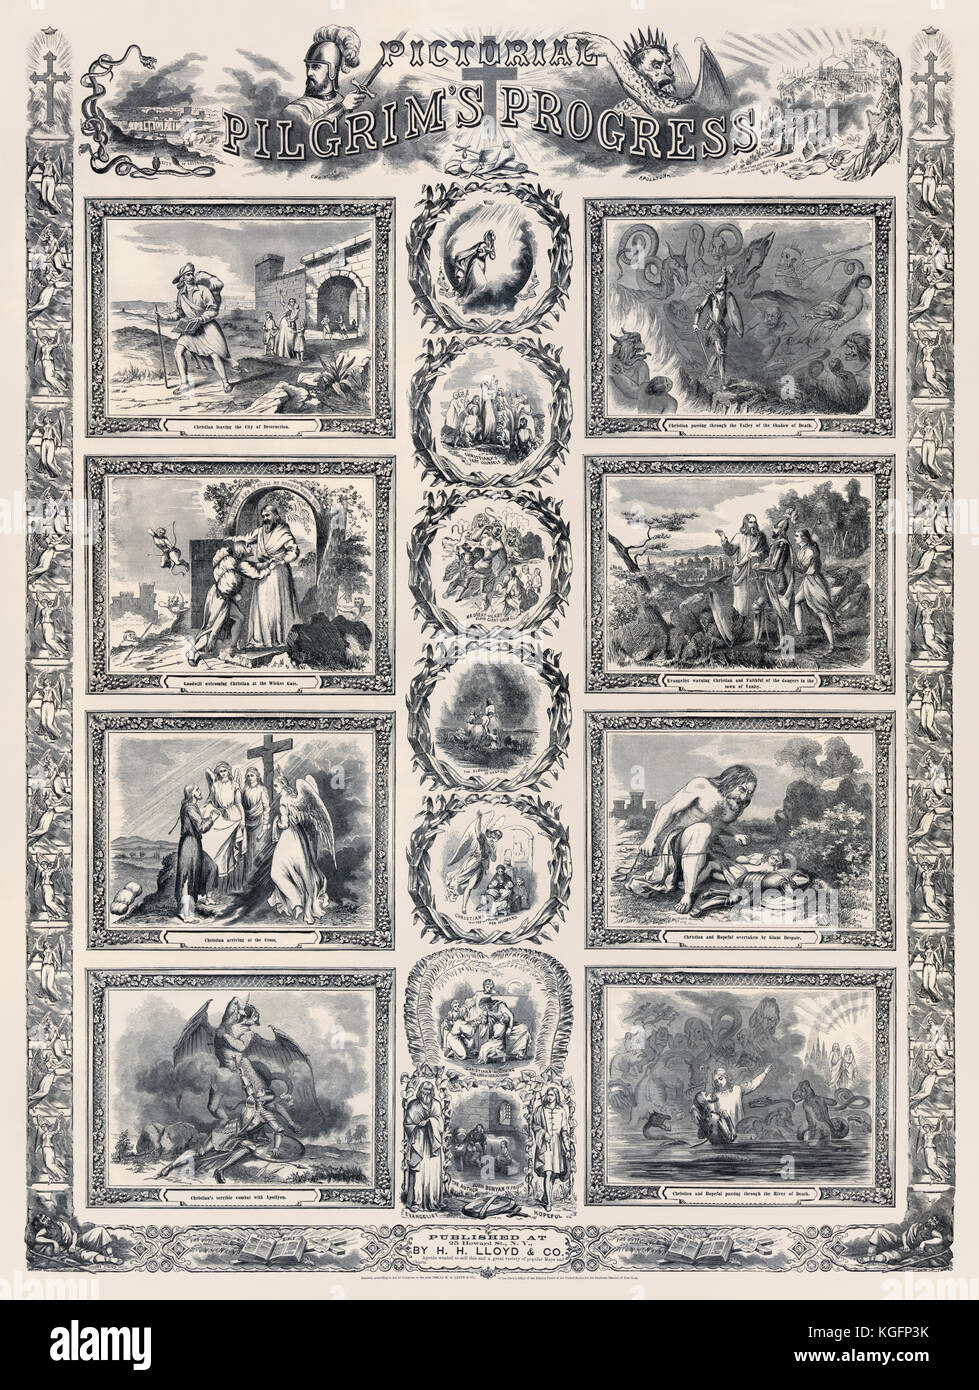 ‘Pictorial Pilgrim's Progress’ showing various events during Christian’s journey from the City of Destruction (Earth) to the Celestial Kingdom (Heaven). Published by H. H. Lloyd & Co. NYC in 1862 based on ‘The Pilgrim’s Progress From This World, To That Which Is To Come’ by John Bunyan (1628-1688) published in 1678. Stock Photo